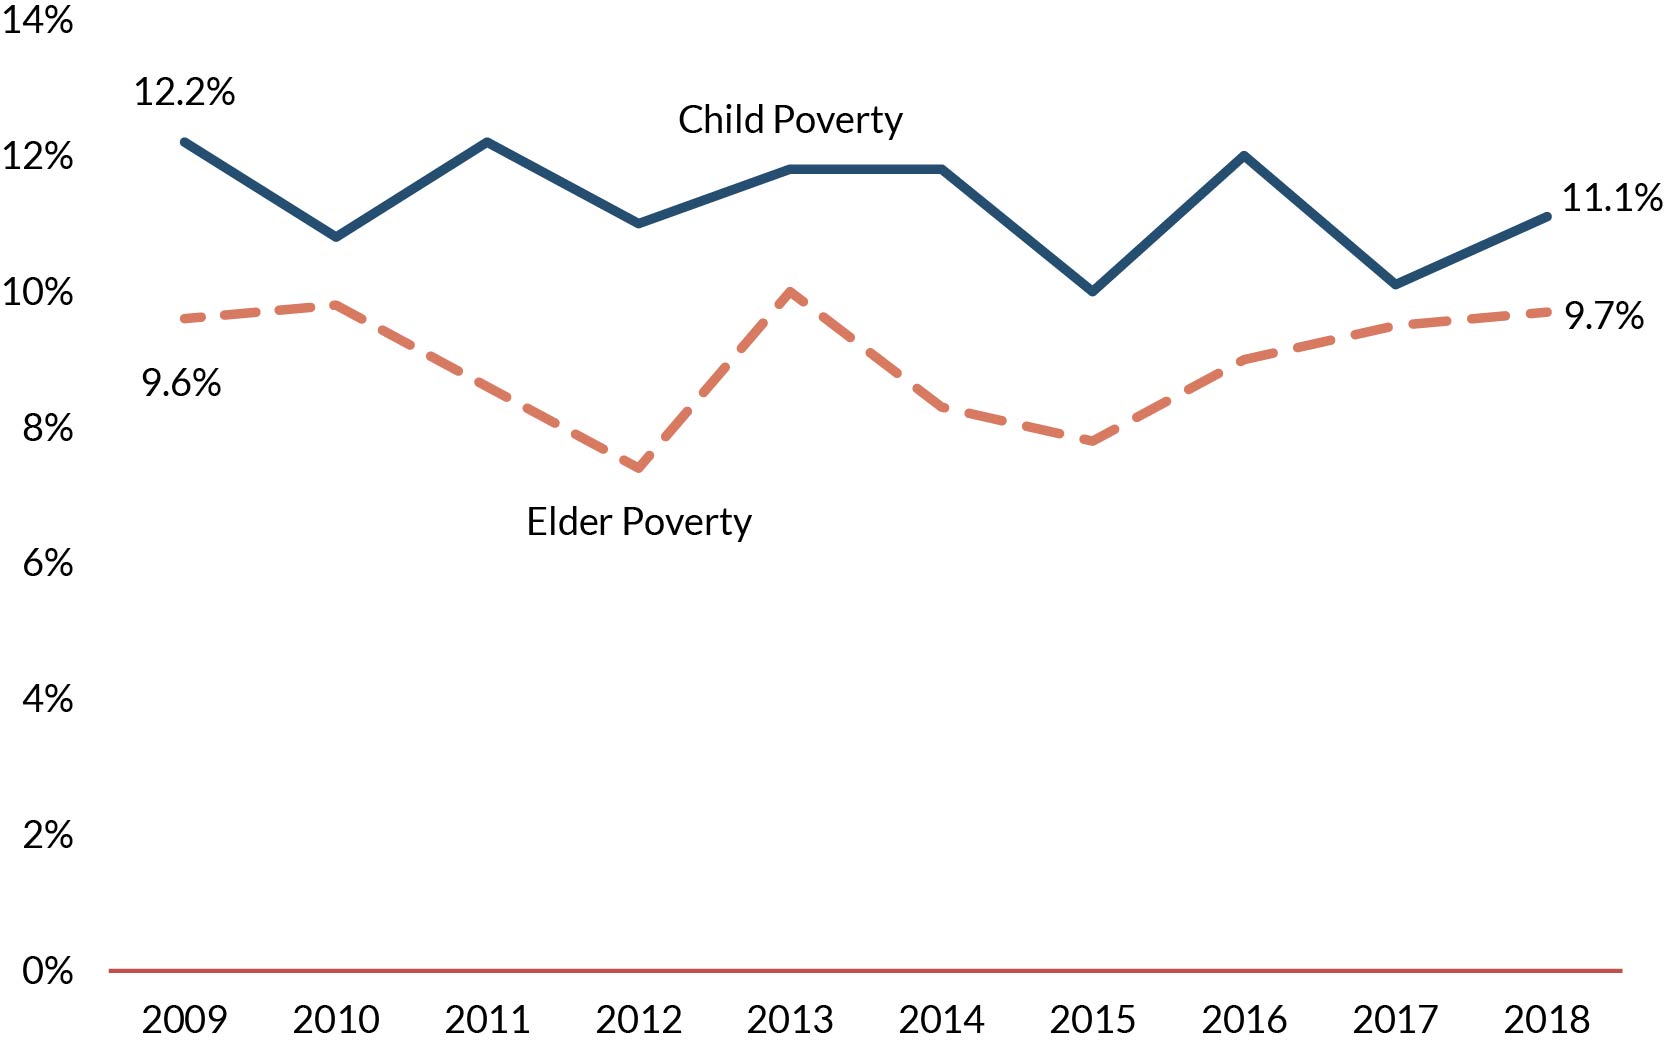 Poverty rose for children and elders in 2018.